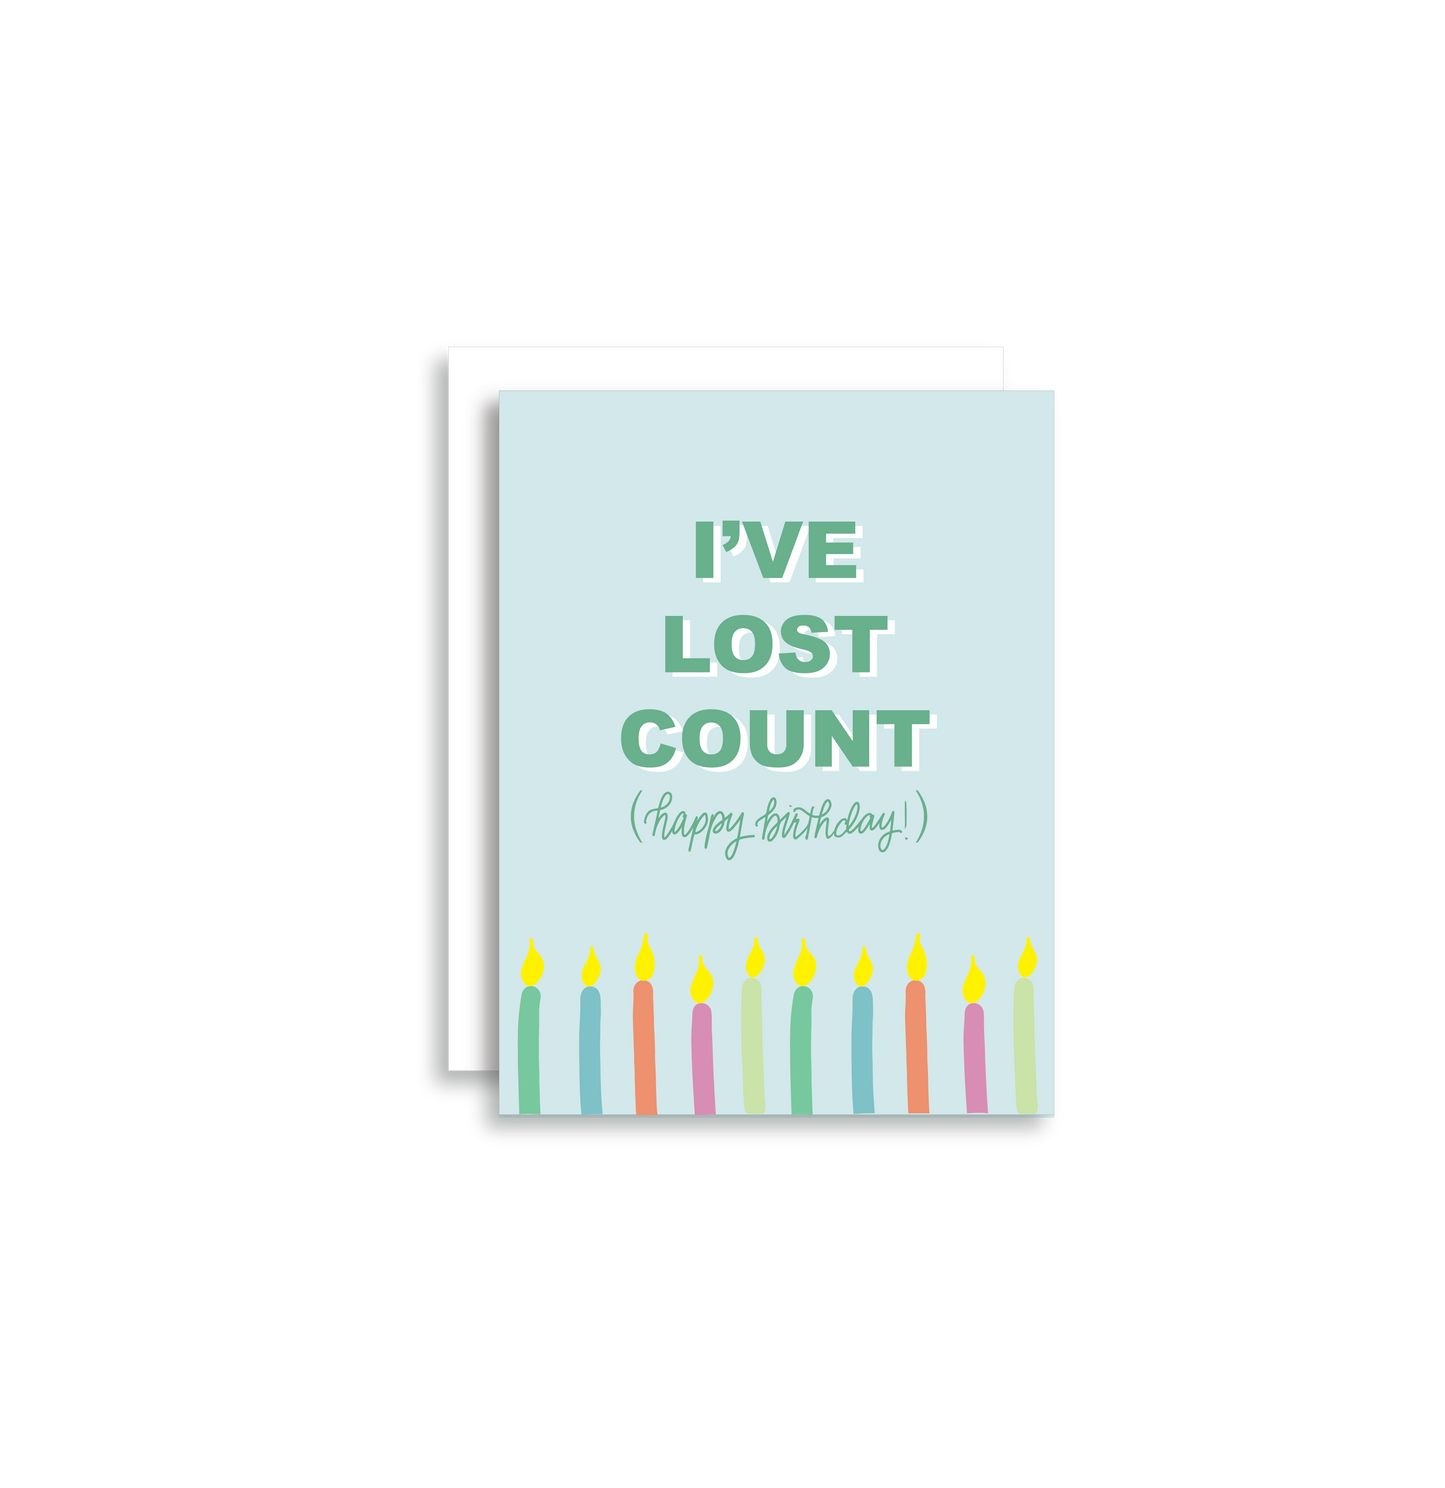 "I've lost count" birthday card is a simple but fun way to let someone know you are thinking about them on their special day.  Each card is folded to 4.25" tall by 5.5" wide, is blank inside and comes with a matching white envelope. Cards are packaged in cellophane sleeves.